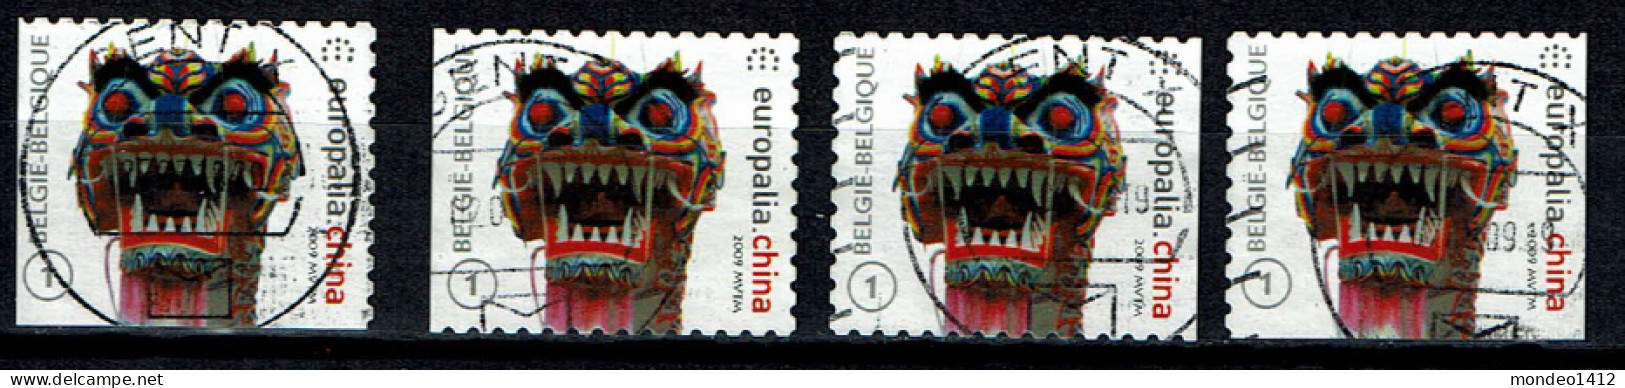 België OBP 3968 - Europalia 2009 - Self Adhesive Stamp From Booklet  Complete - Oblitérés